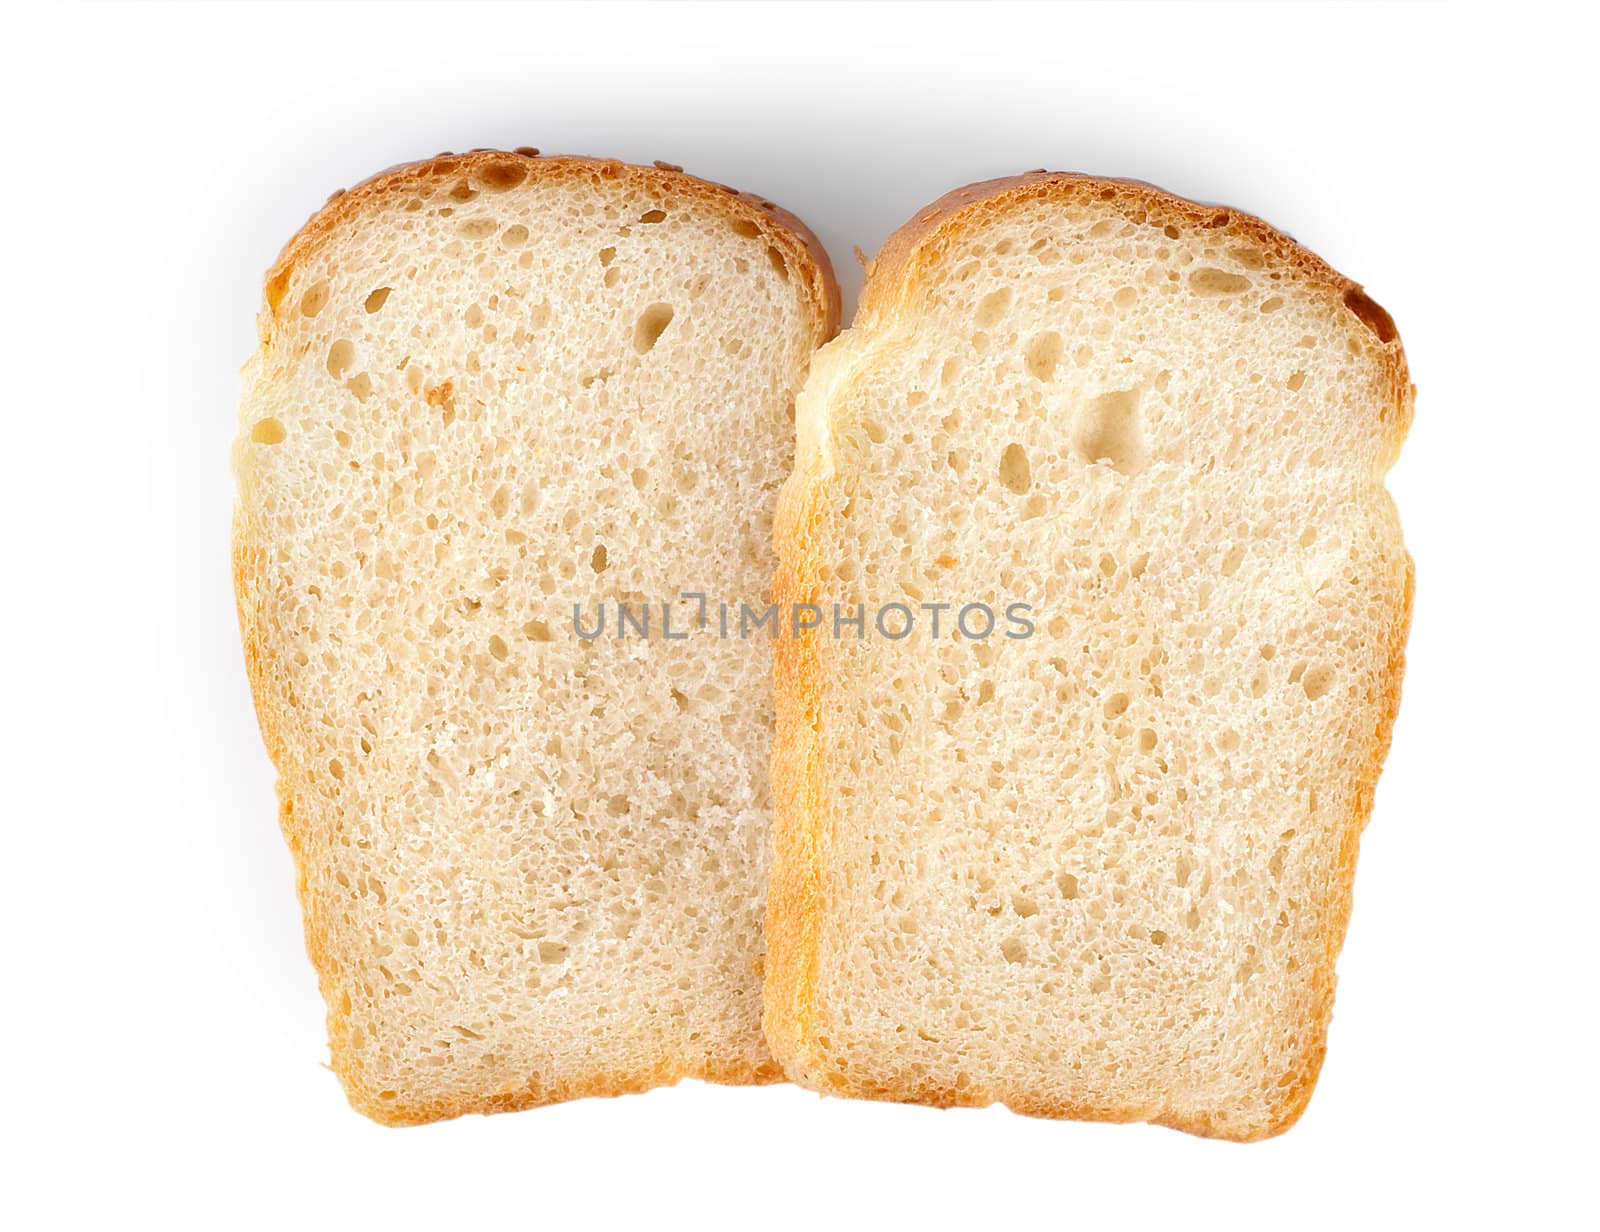 Slices of bread isolated on a white background